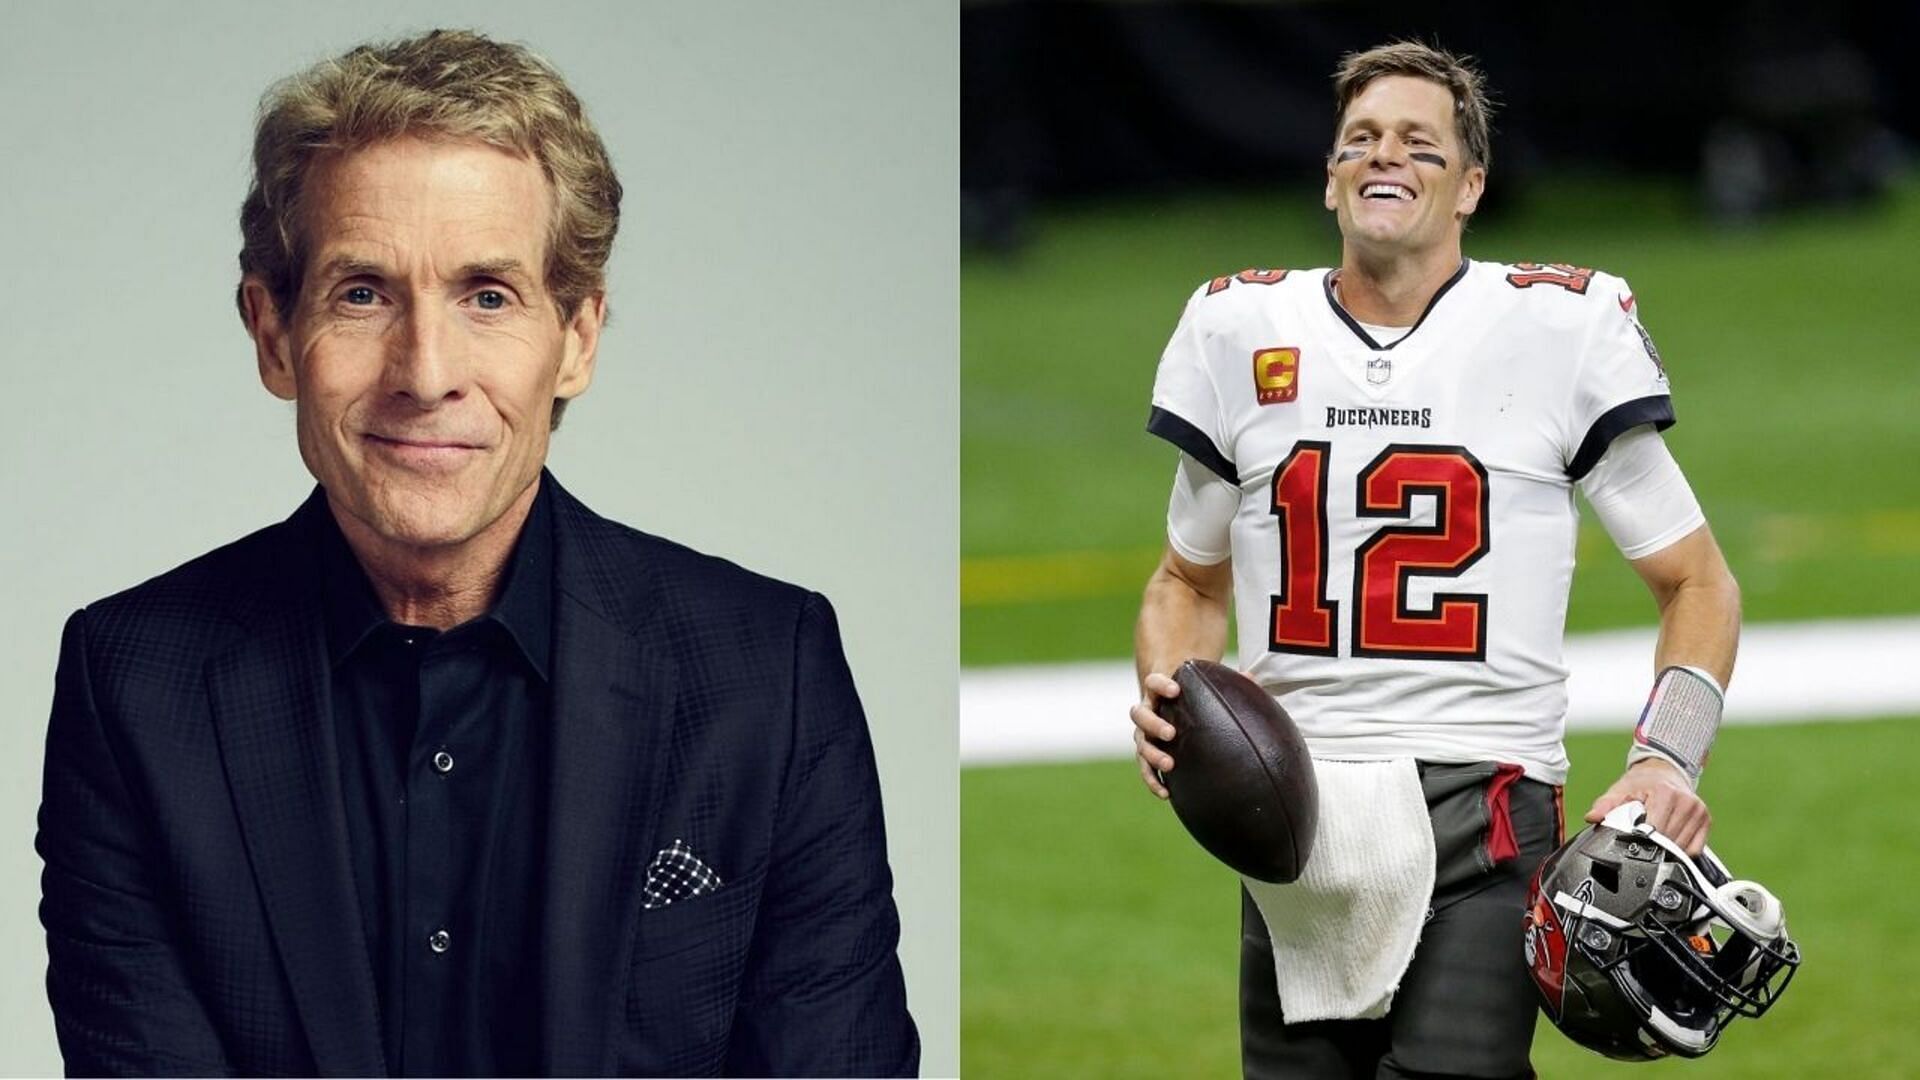 Skip Bayless gives theory on Tom Brady - Courtesy of Undisputed on YouTube